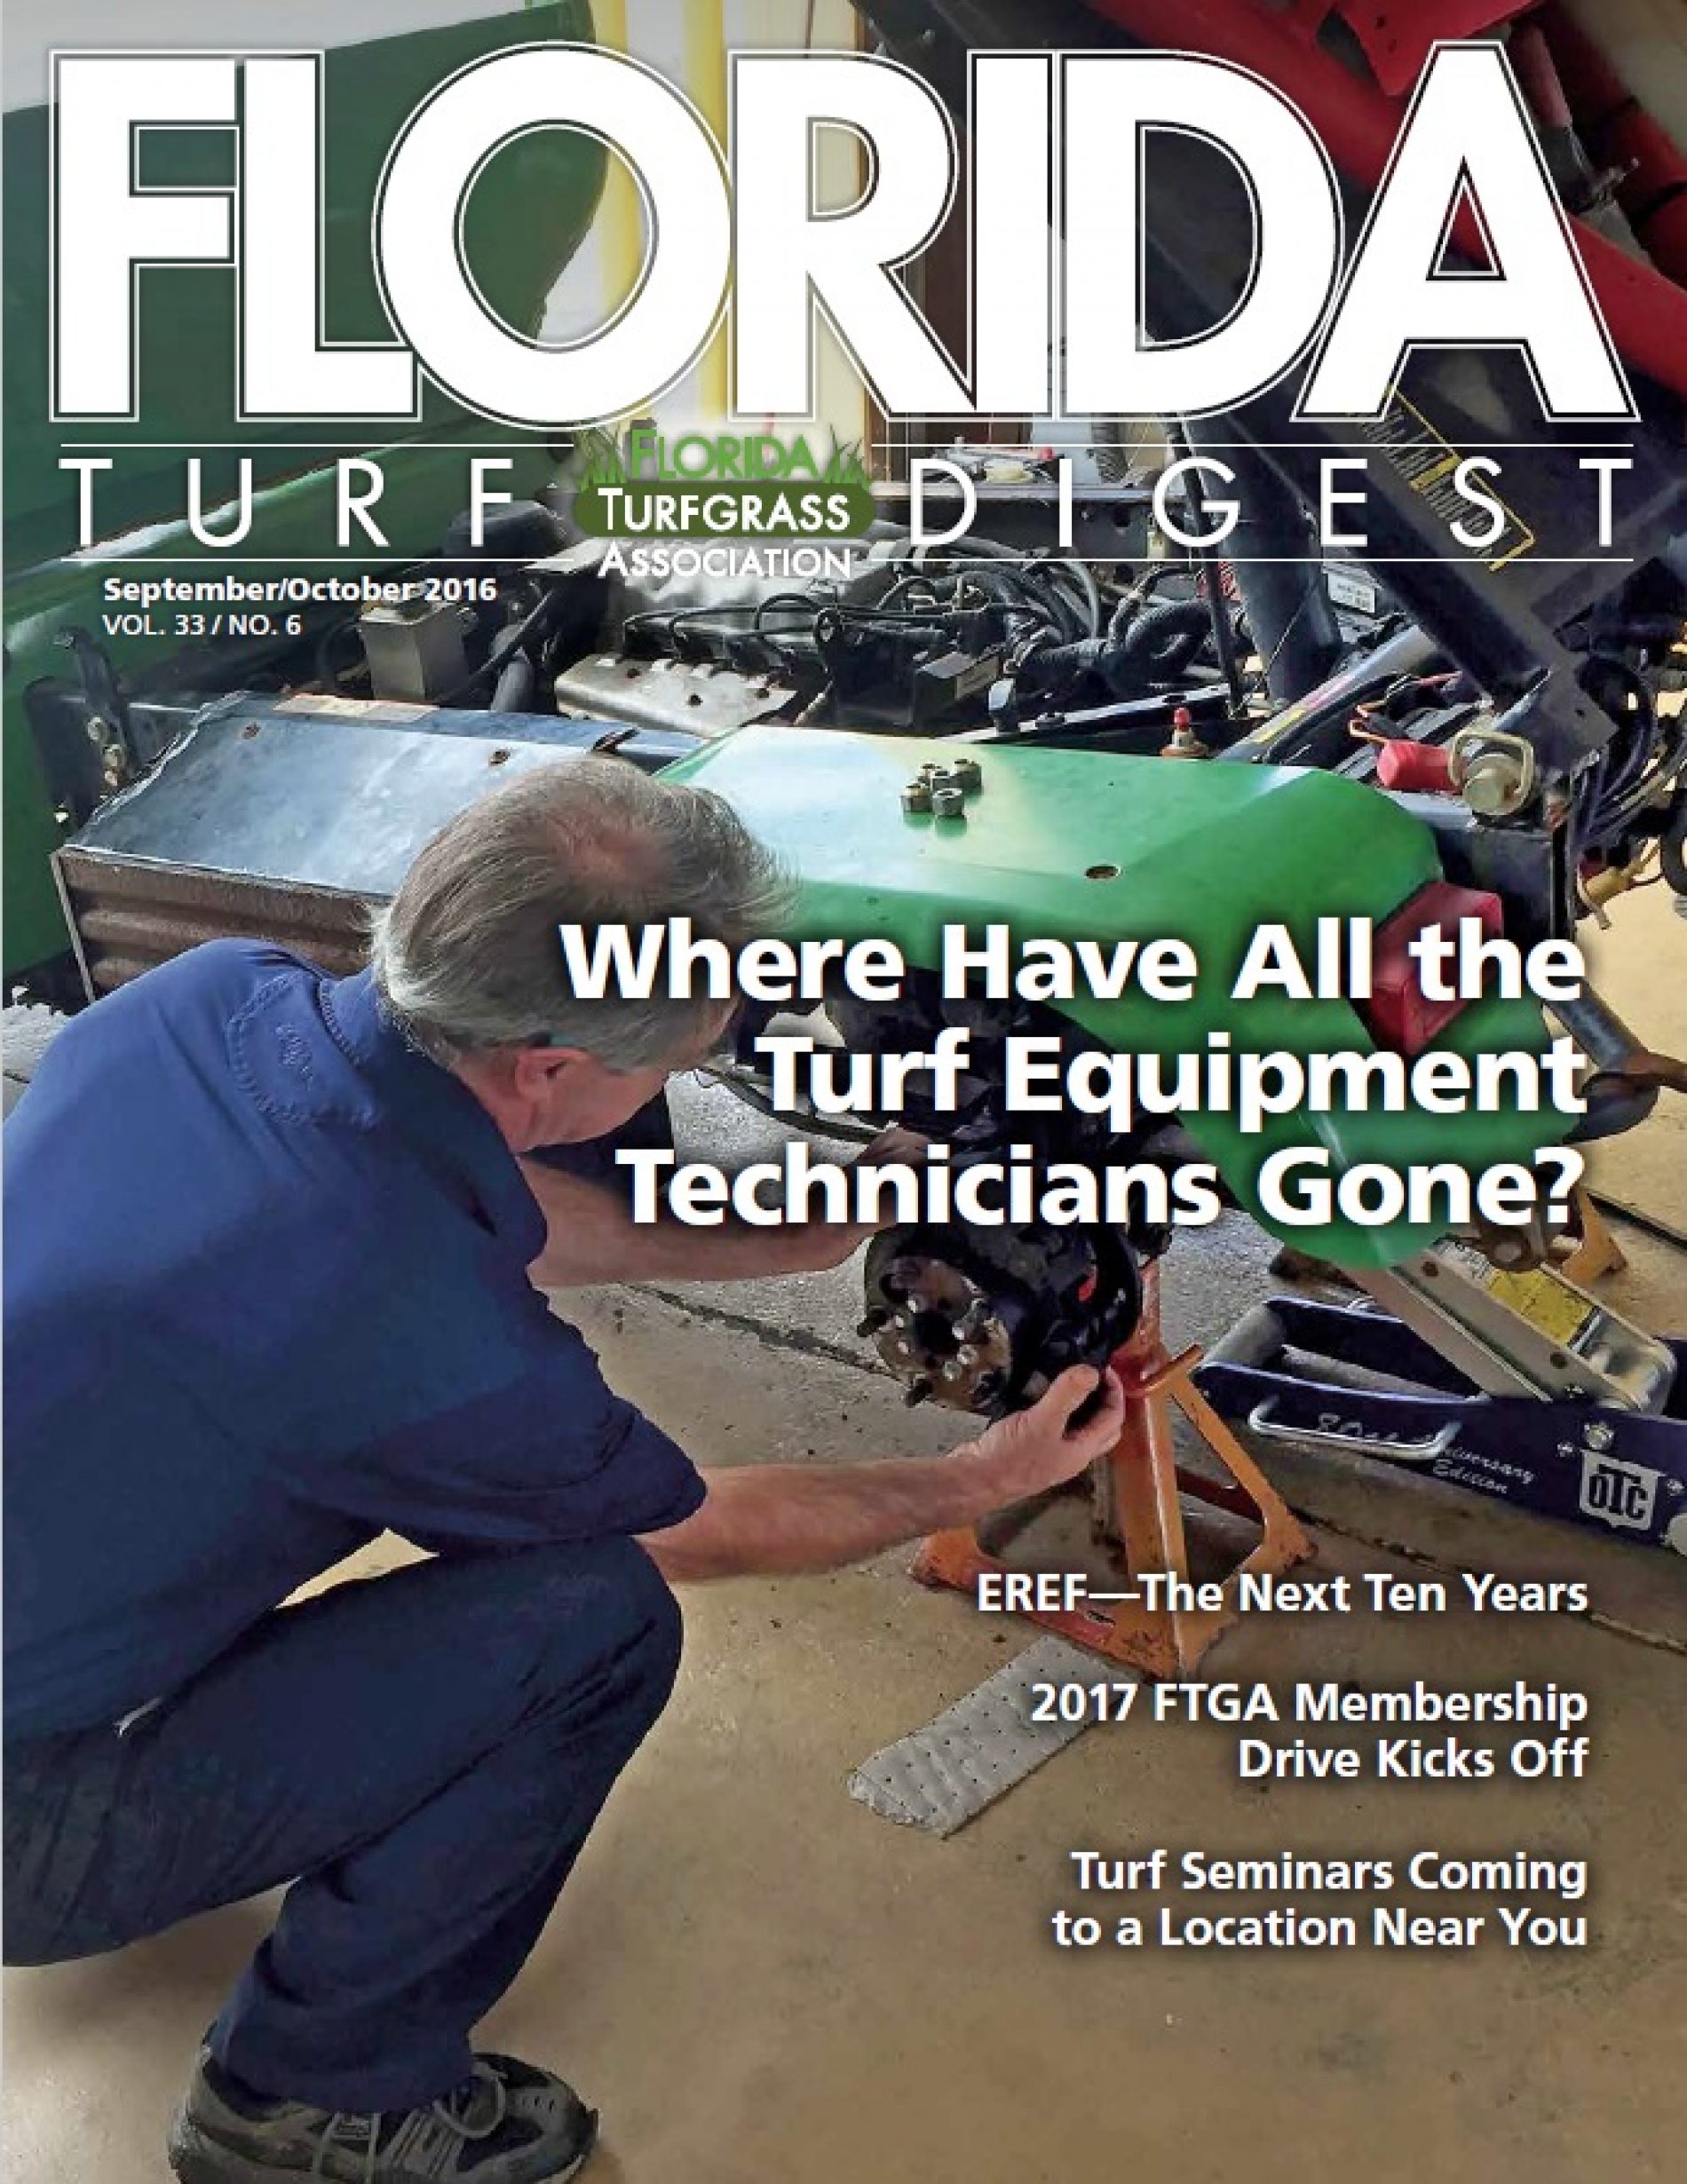 Cover Story Florida Turf Digest – Where have all the Techs Gone?